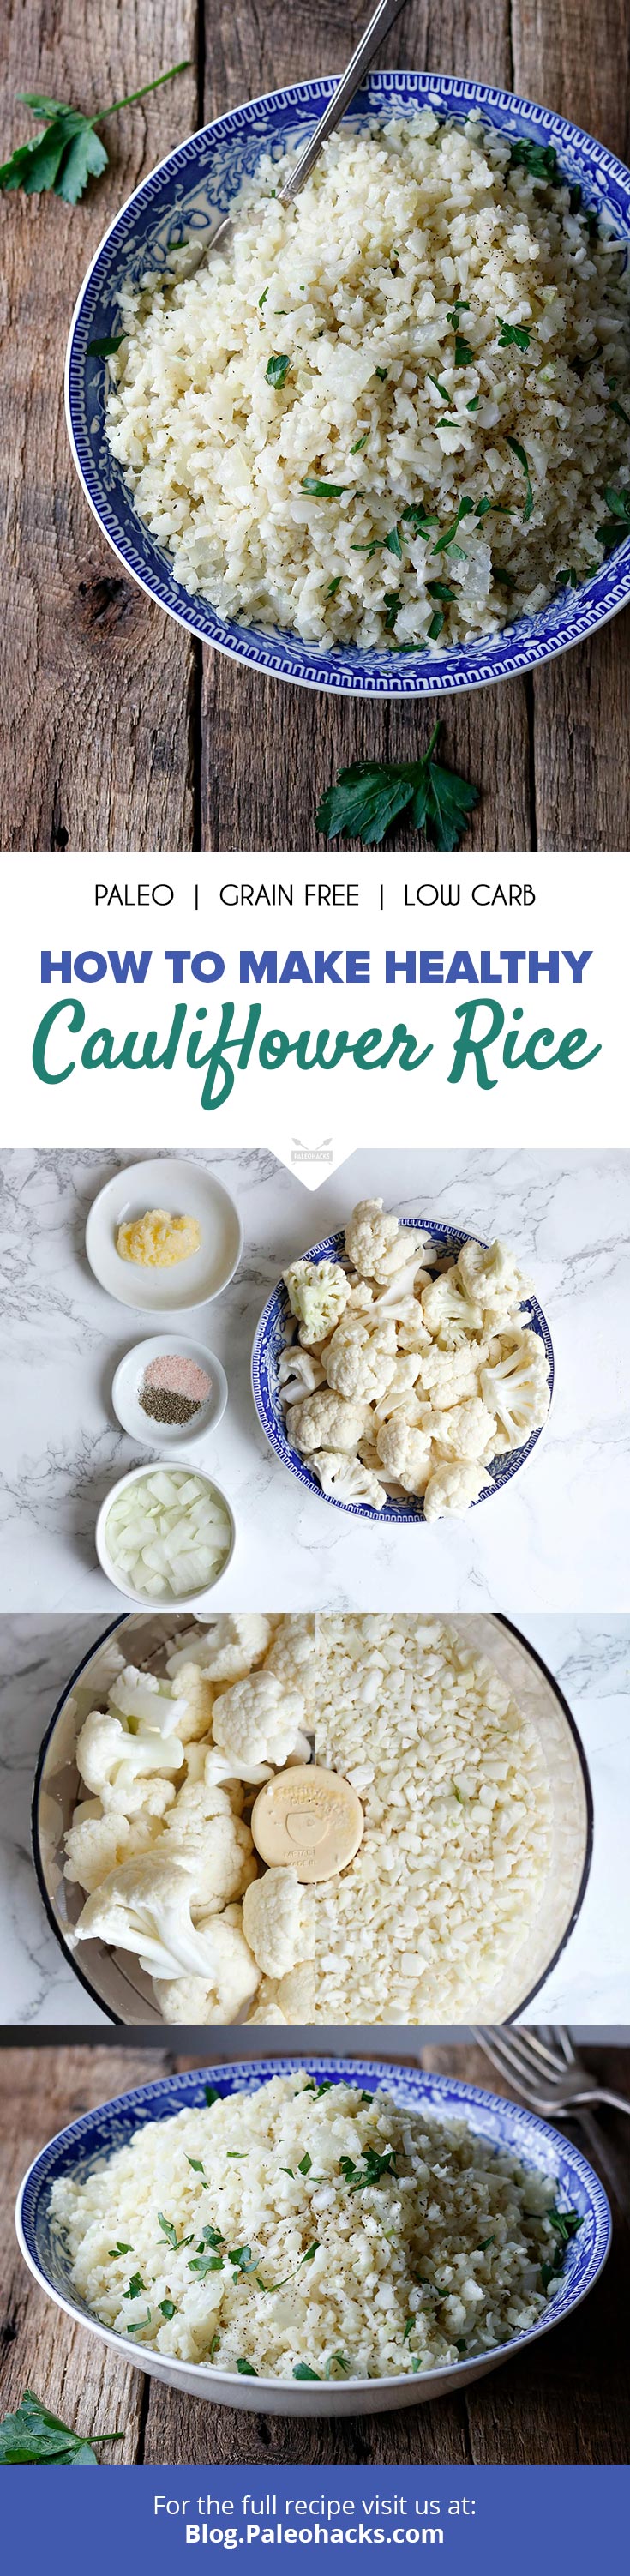 In this quick and easy recipe, ingredients are kept simple for a cauliflower “rice” that blends seamlessly with any of your favorite sauces and spices.